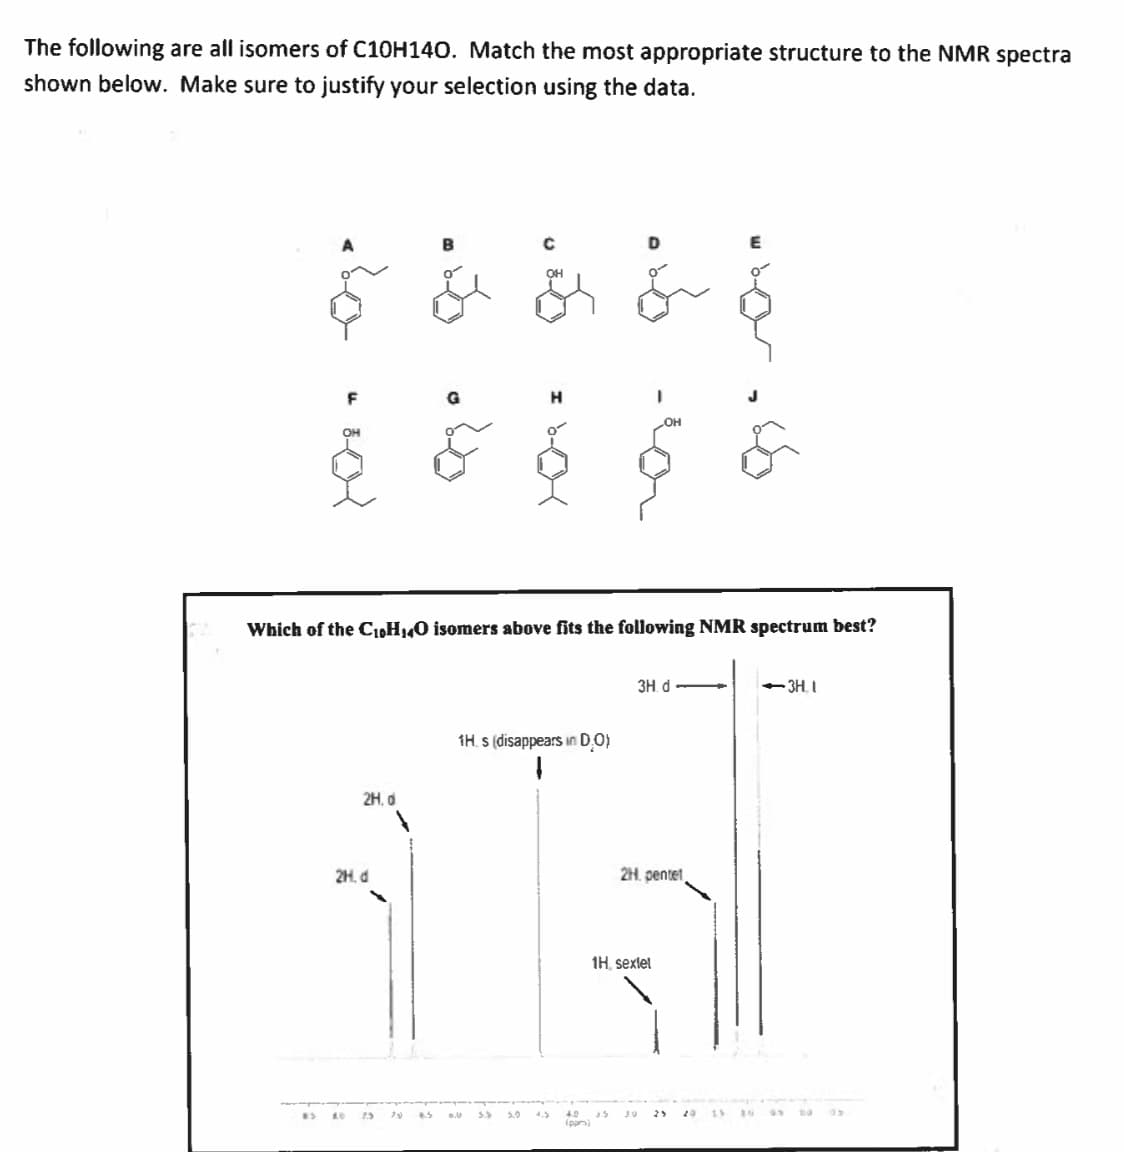 The following are all isomers of C10H140. Match the most appropriate structure to the NMR spectra
shown below. Make sure to justify your selection using the data.
D
Он
Which of the C1,H¾0 isomers above fits the following NMR spectrum best?
3H. d -
- 3H. I
1H. s (disappears in DO)
2H. d
2H. d
2H. pentet
1H, sexlel
0 5.
5.0
4.0
ipan)
4.5
29
w bor
